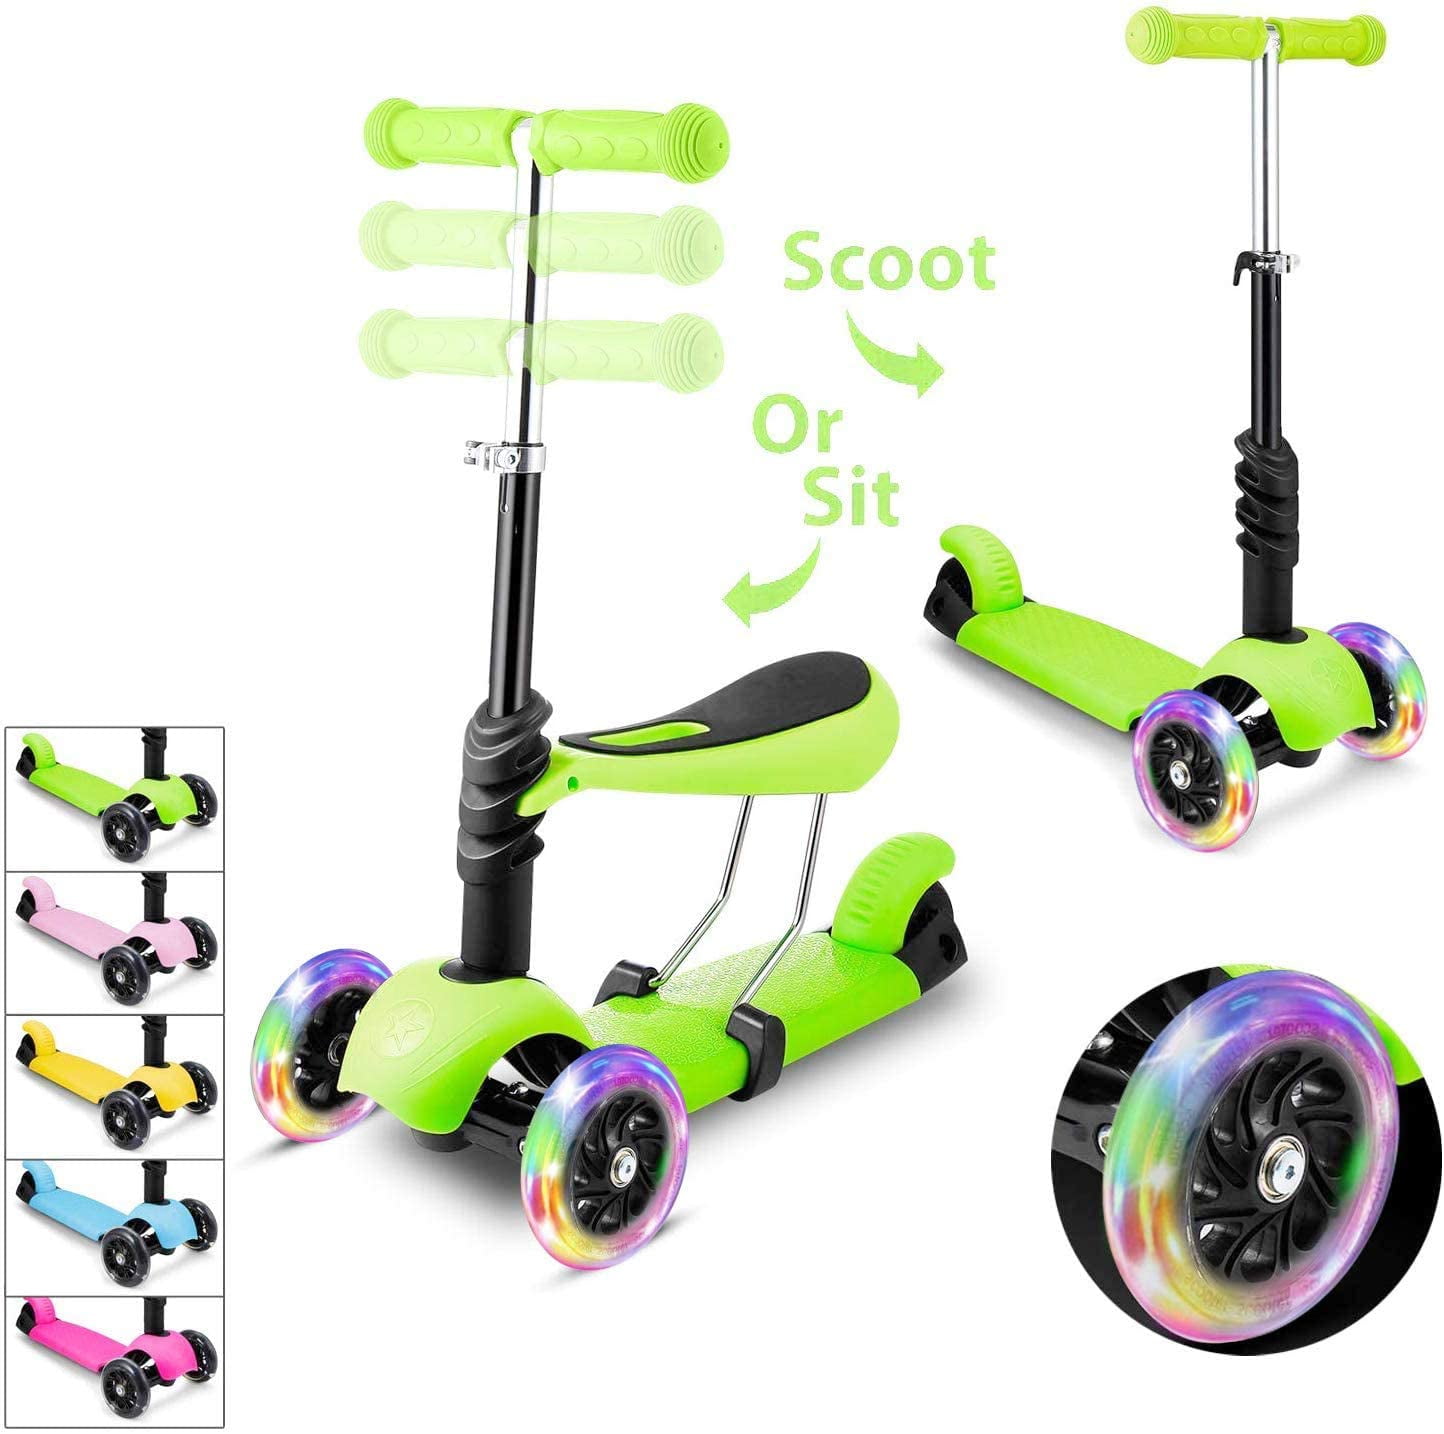 Details about   Hurtle ScootKid 3 Wheel Child Ride On Scooter with LED Wheels Graffiti 4 Pack 